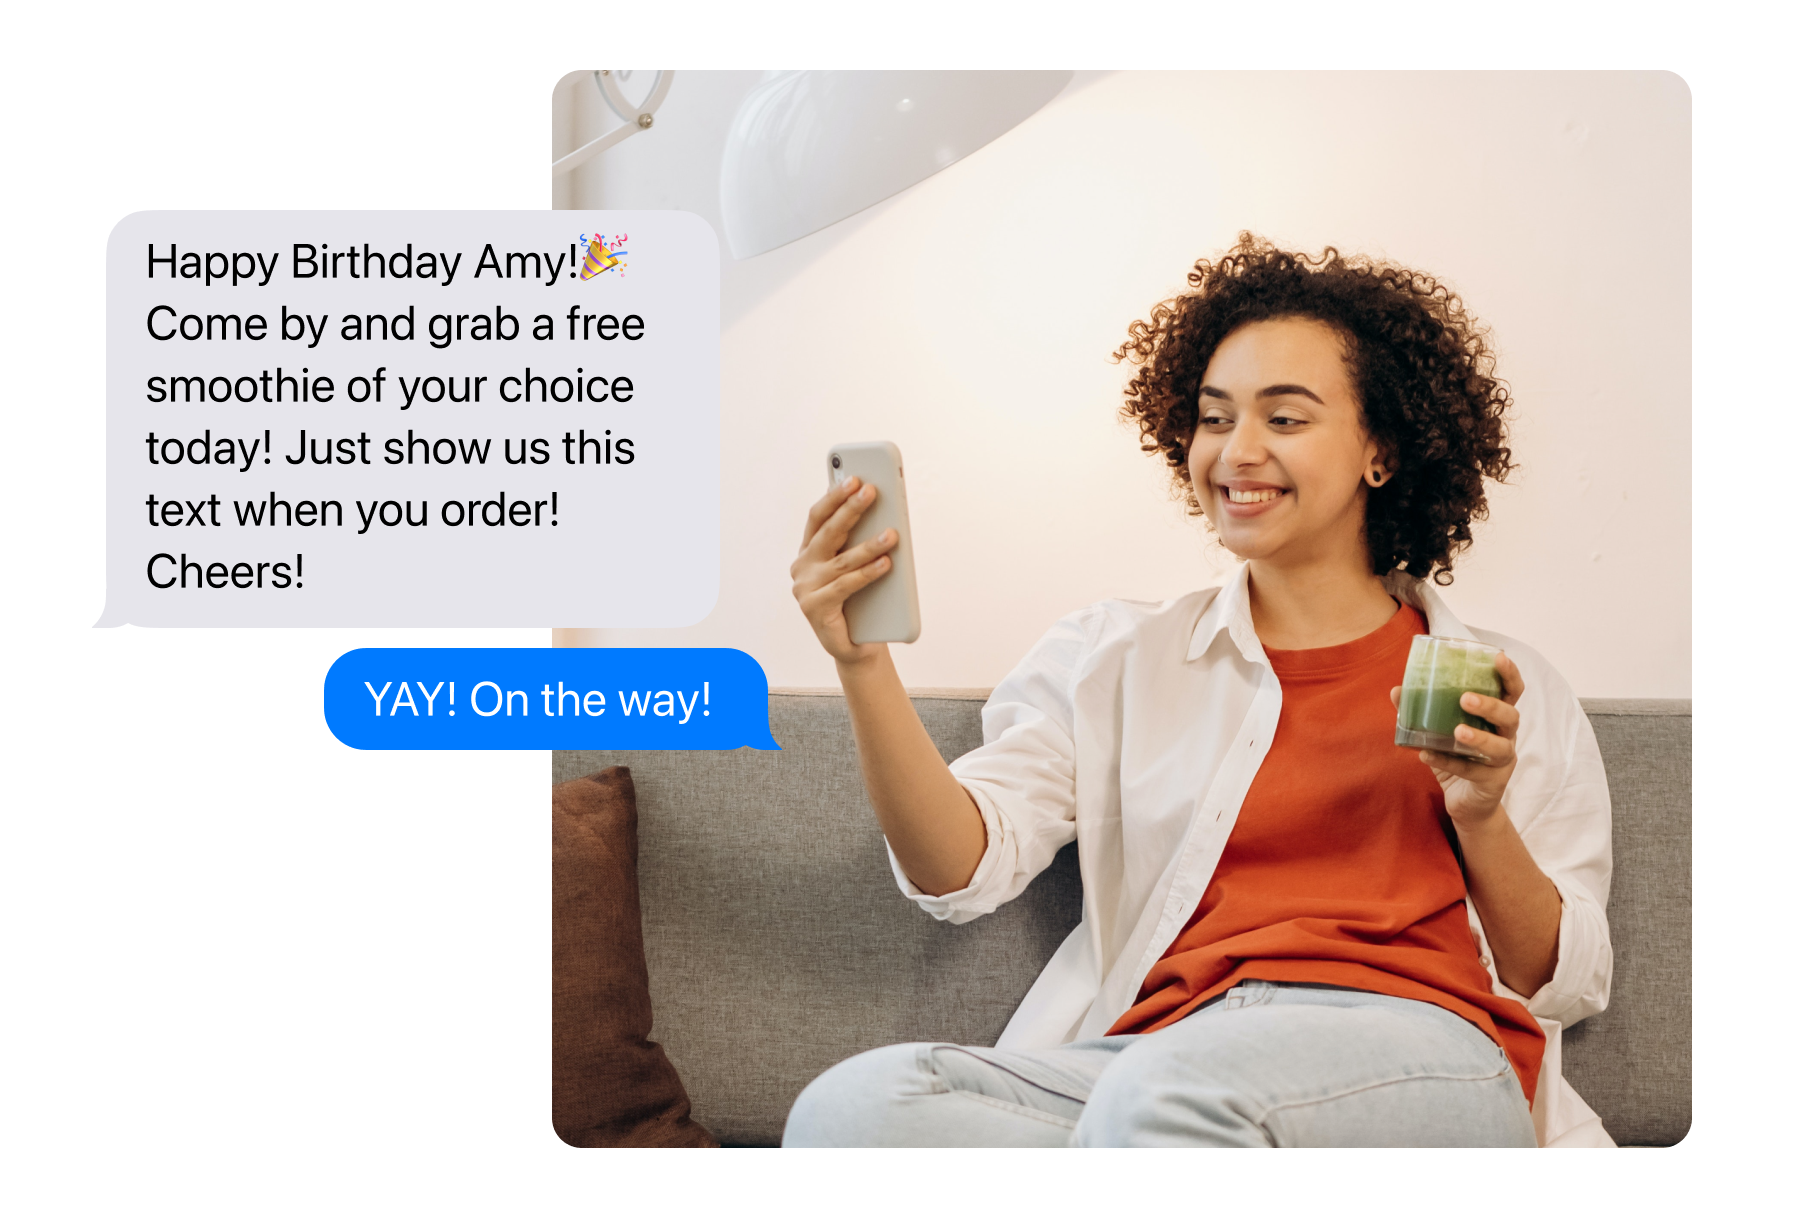 Text message marketing birthday campaign for gyms and fitness centers